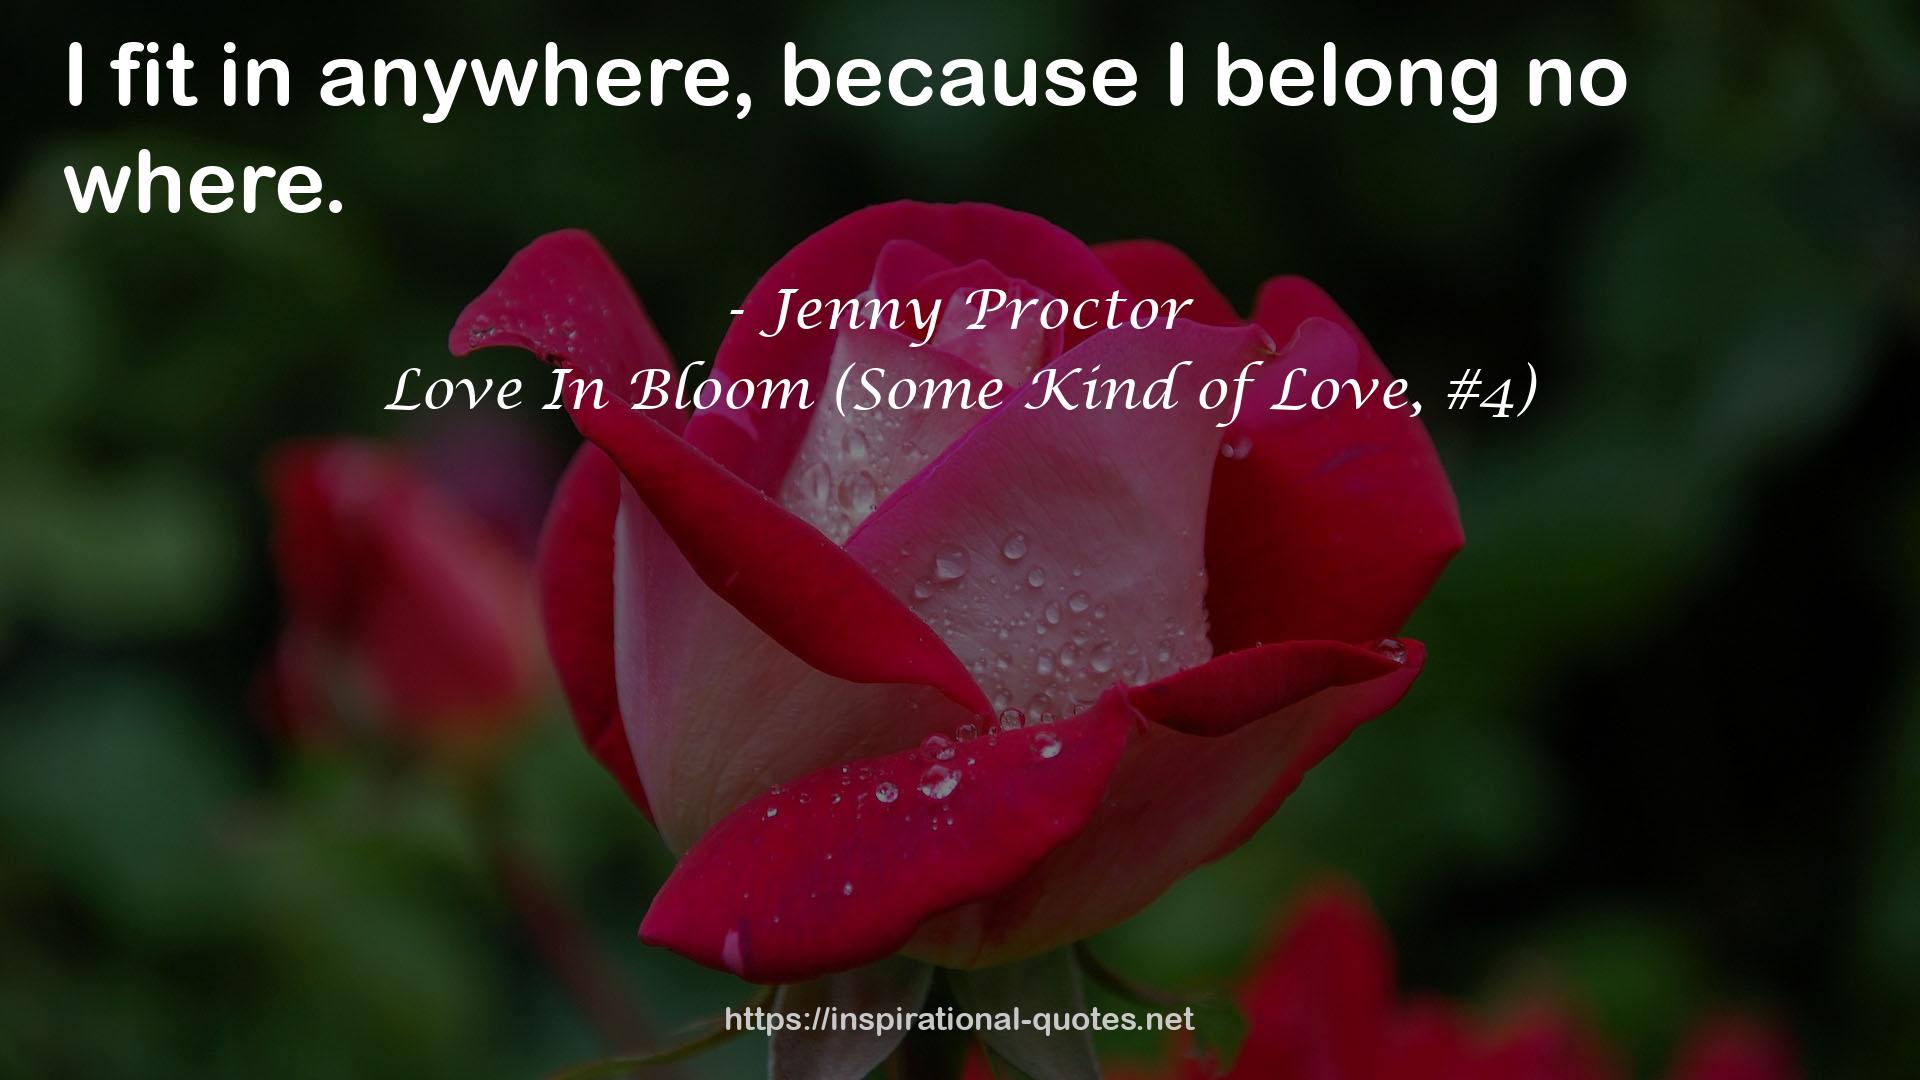 Love In Bloom (Some Kind of Love, #4) QUOTES